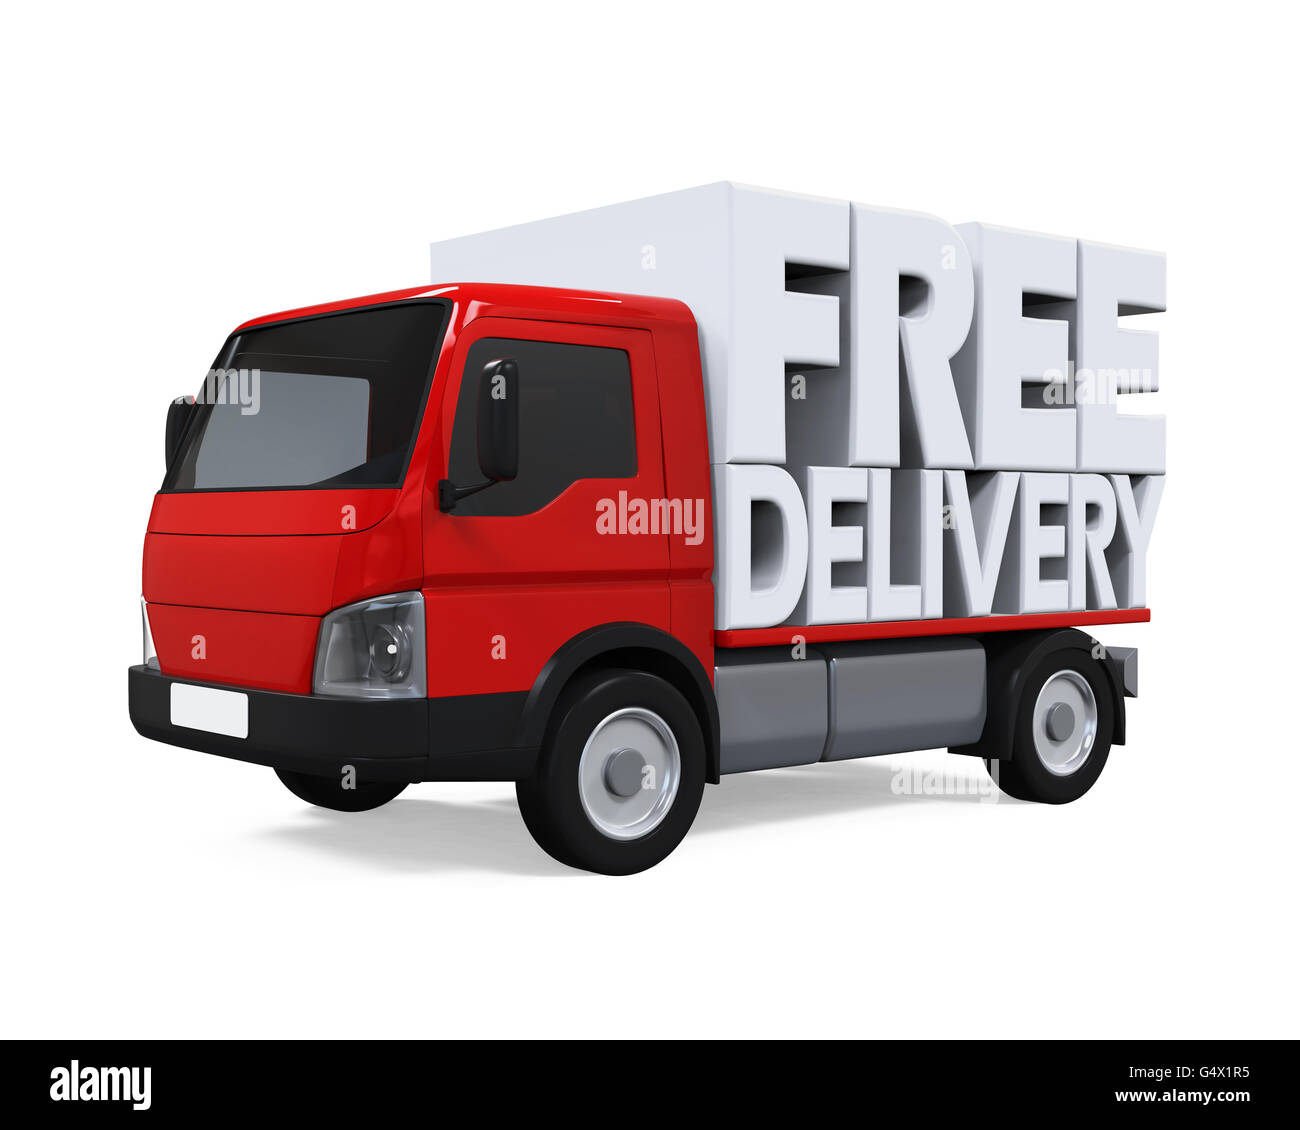 Free Delivery Text Stock Photo 